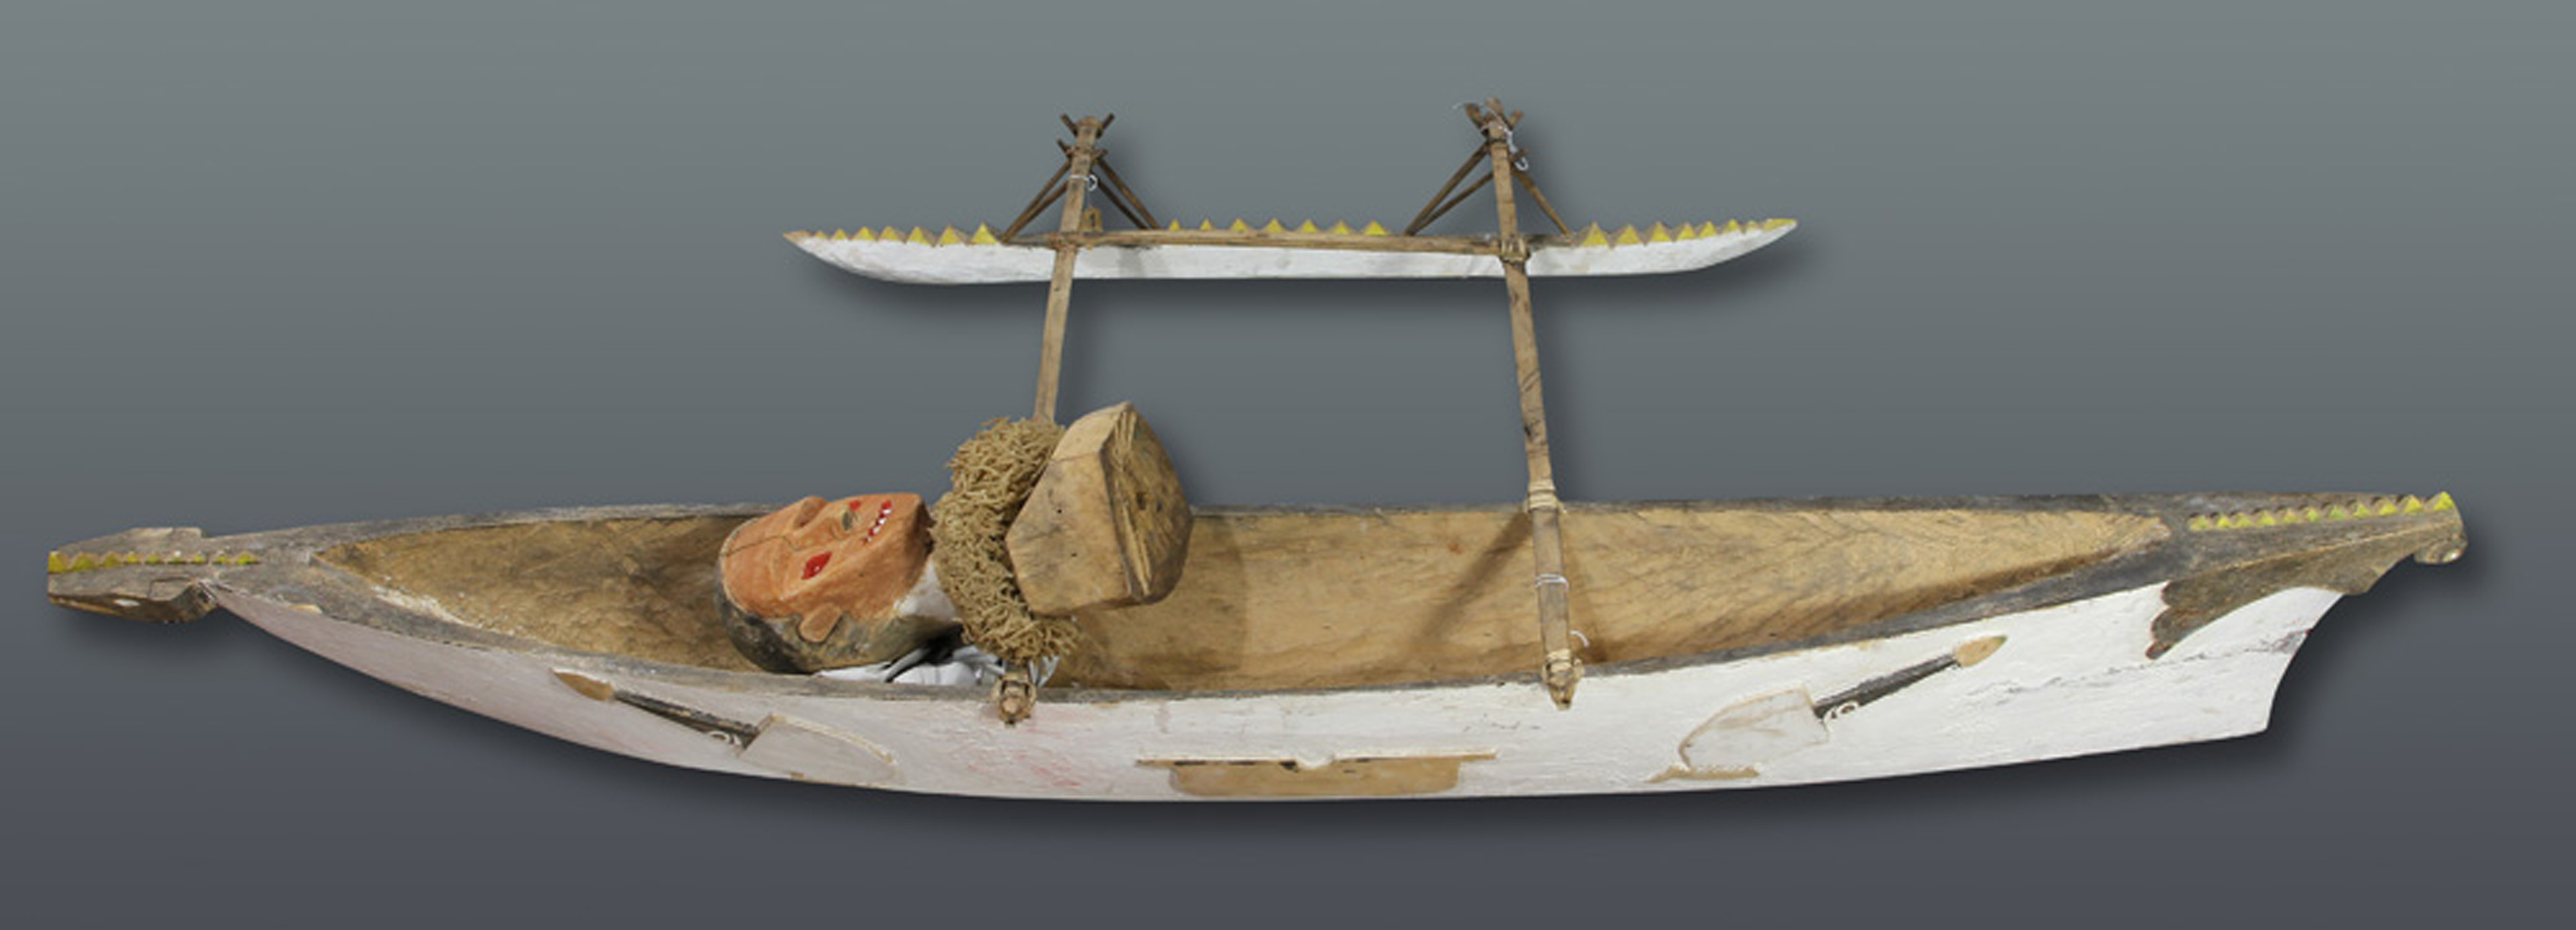 A MODEL OUTRIGGER CANOE USED FOR